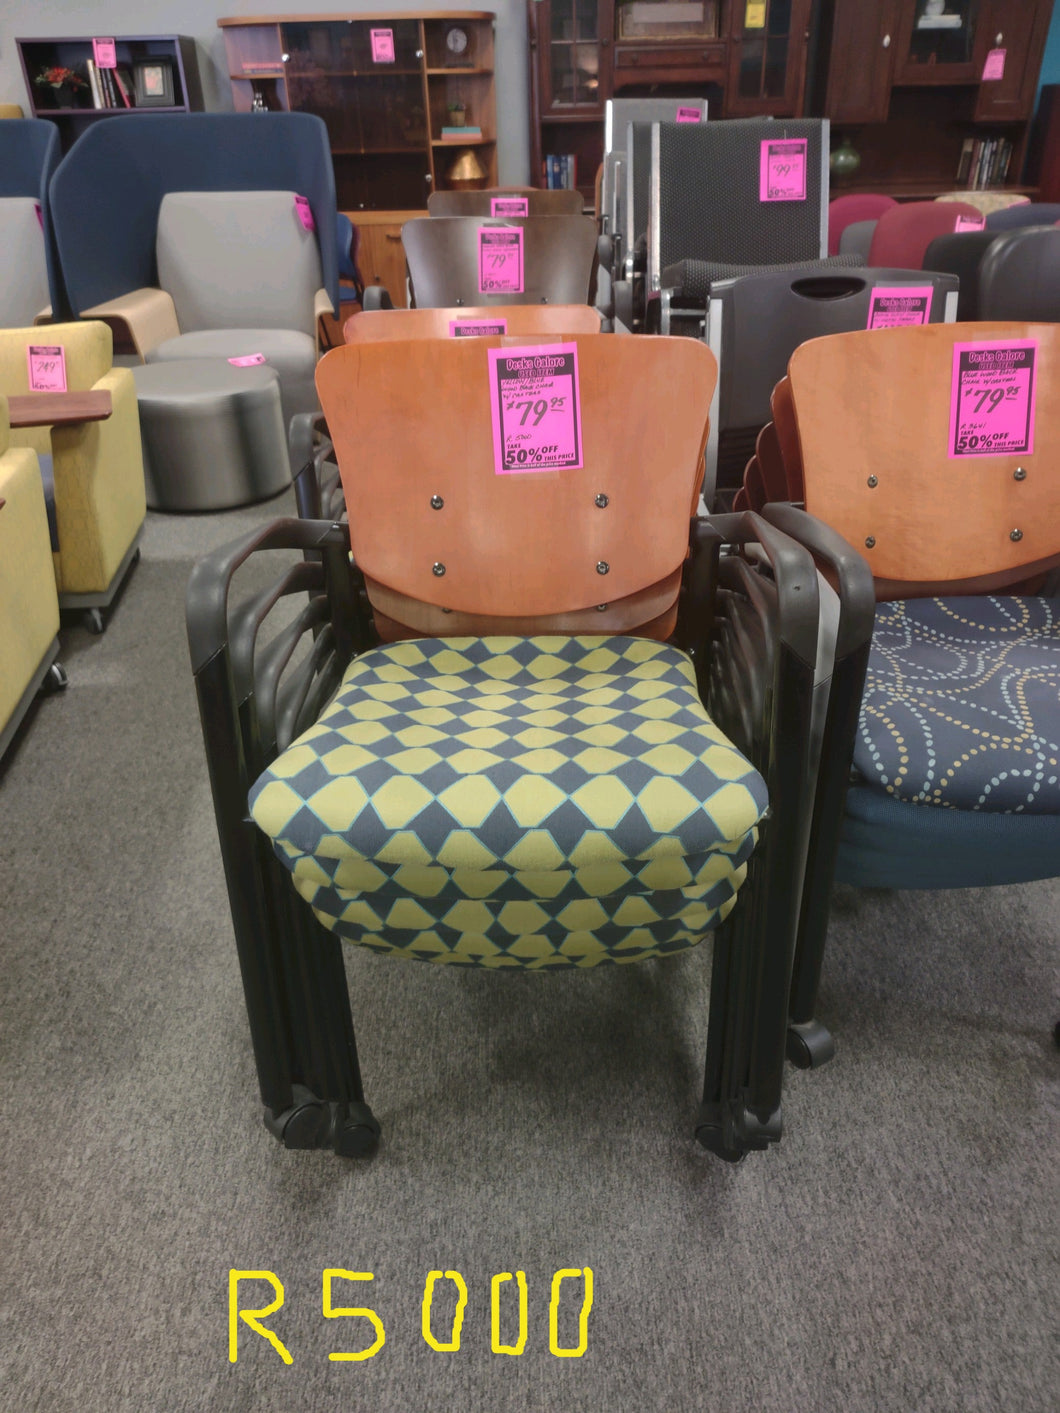 R8002 Rolling Stackable USED Chair $39.98